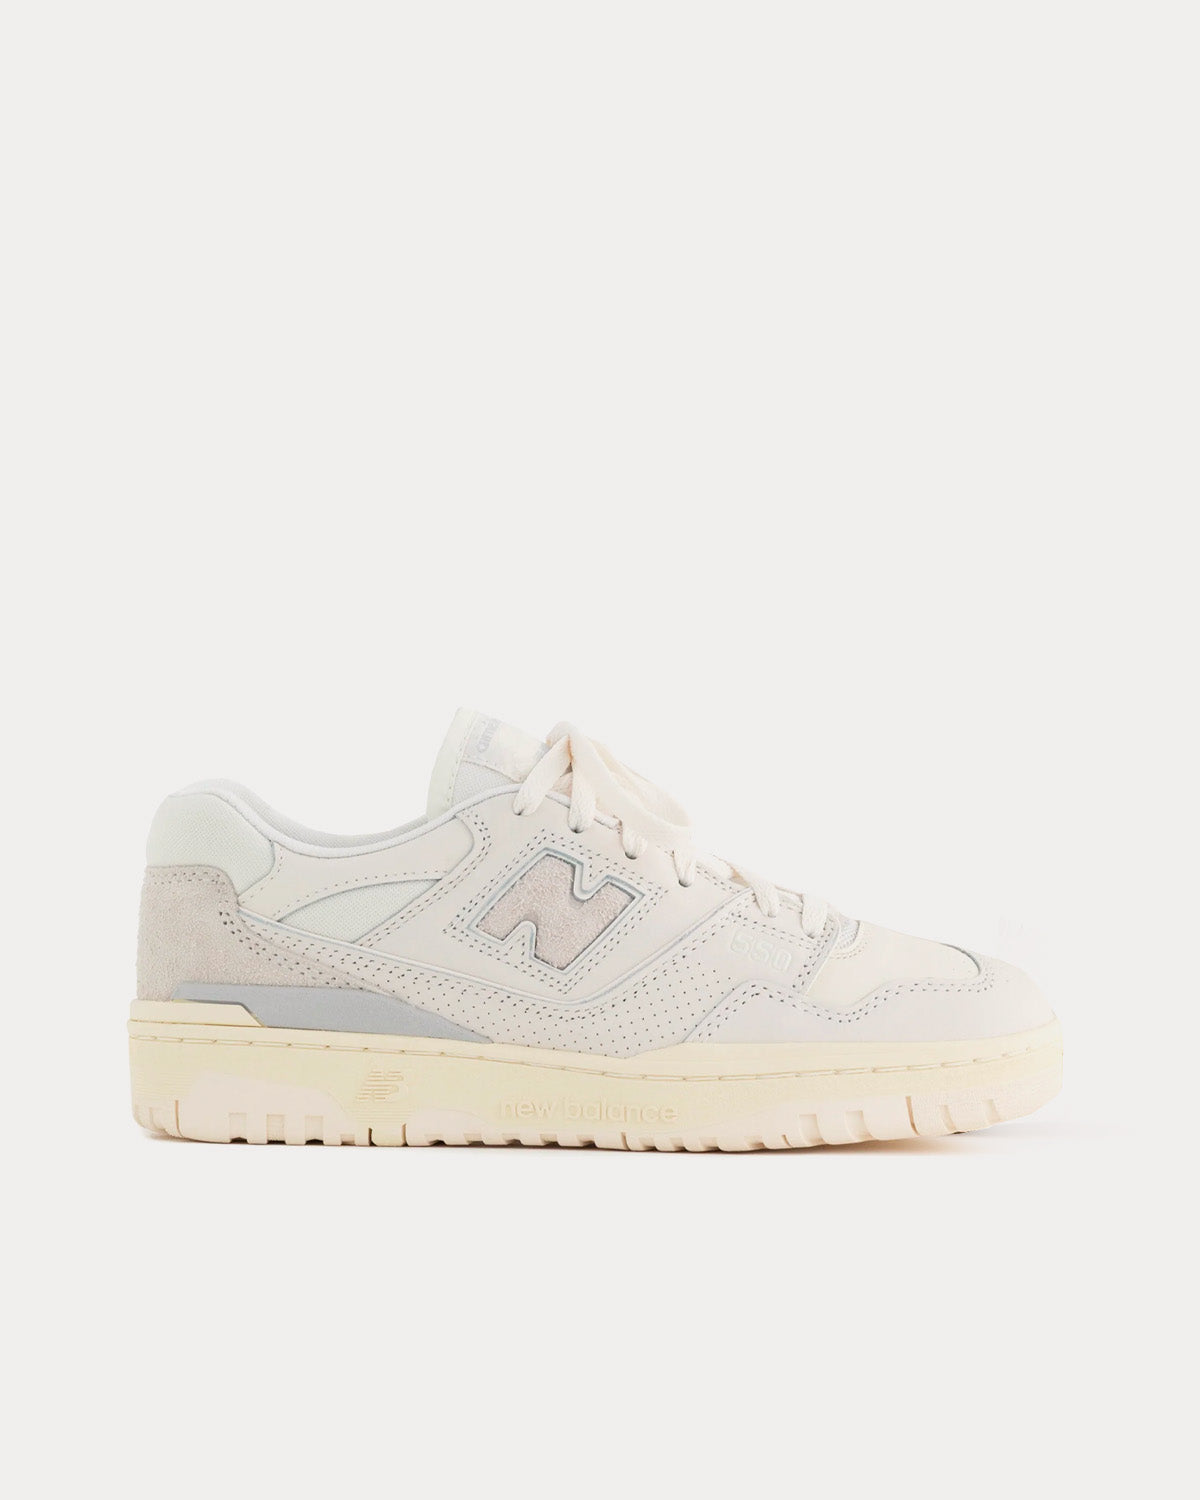 New Balance x Aime Leon Dore - P550 Basketball Oxfords White Low Top Sneakers